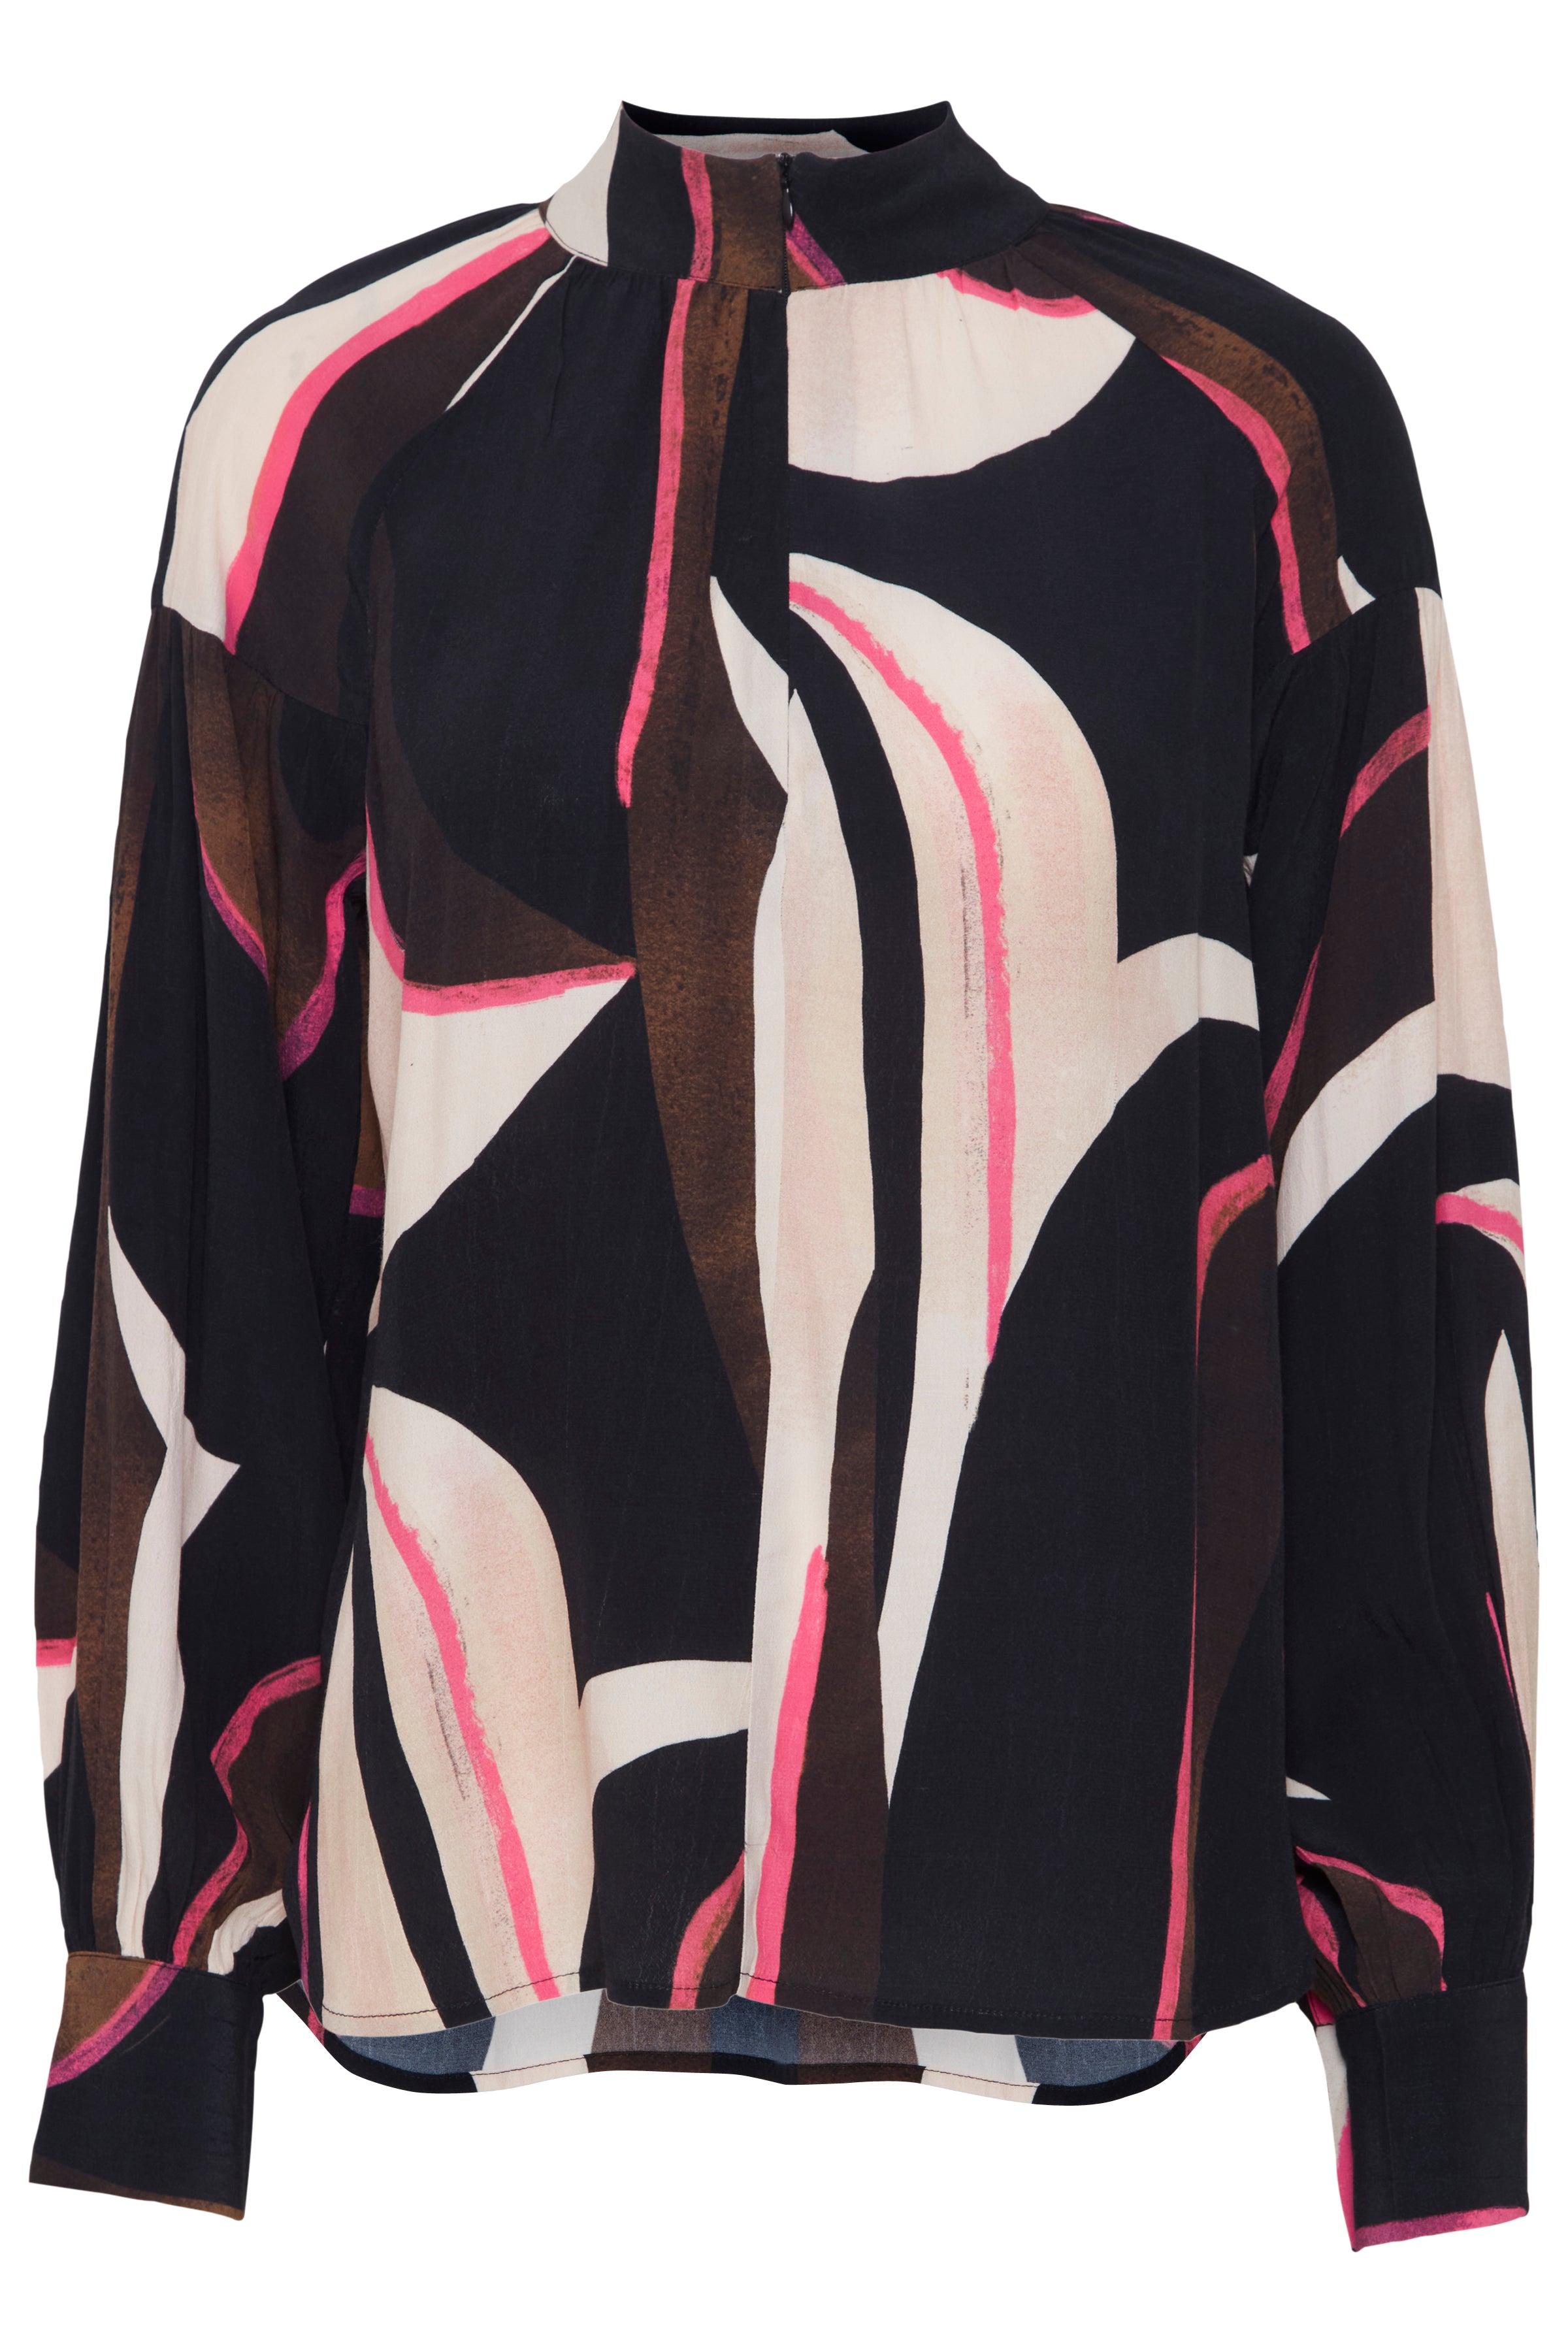 Fransa Frlena Navy Blazer/Pink Ruby Abstract Printed 67 Blouse, 20613285 – Boutique